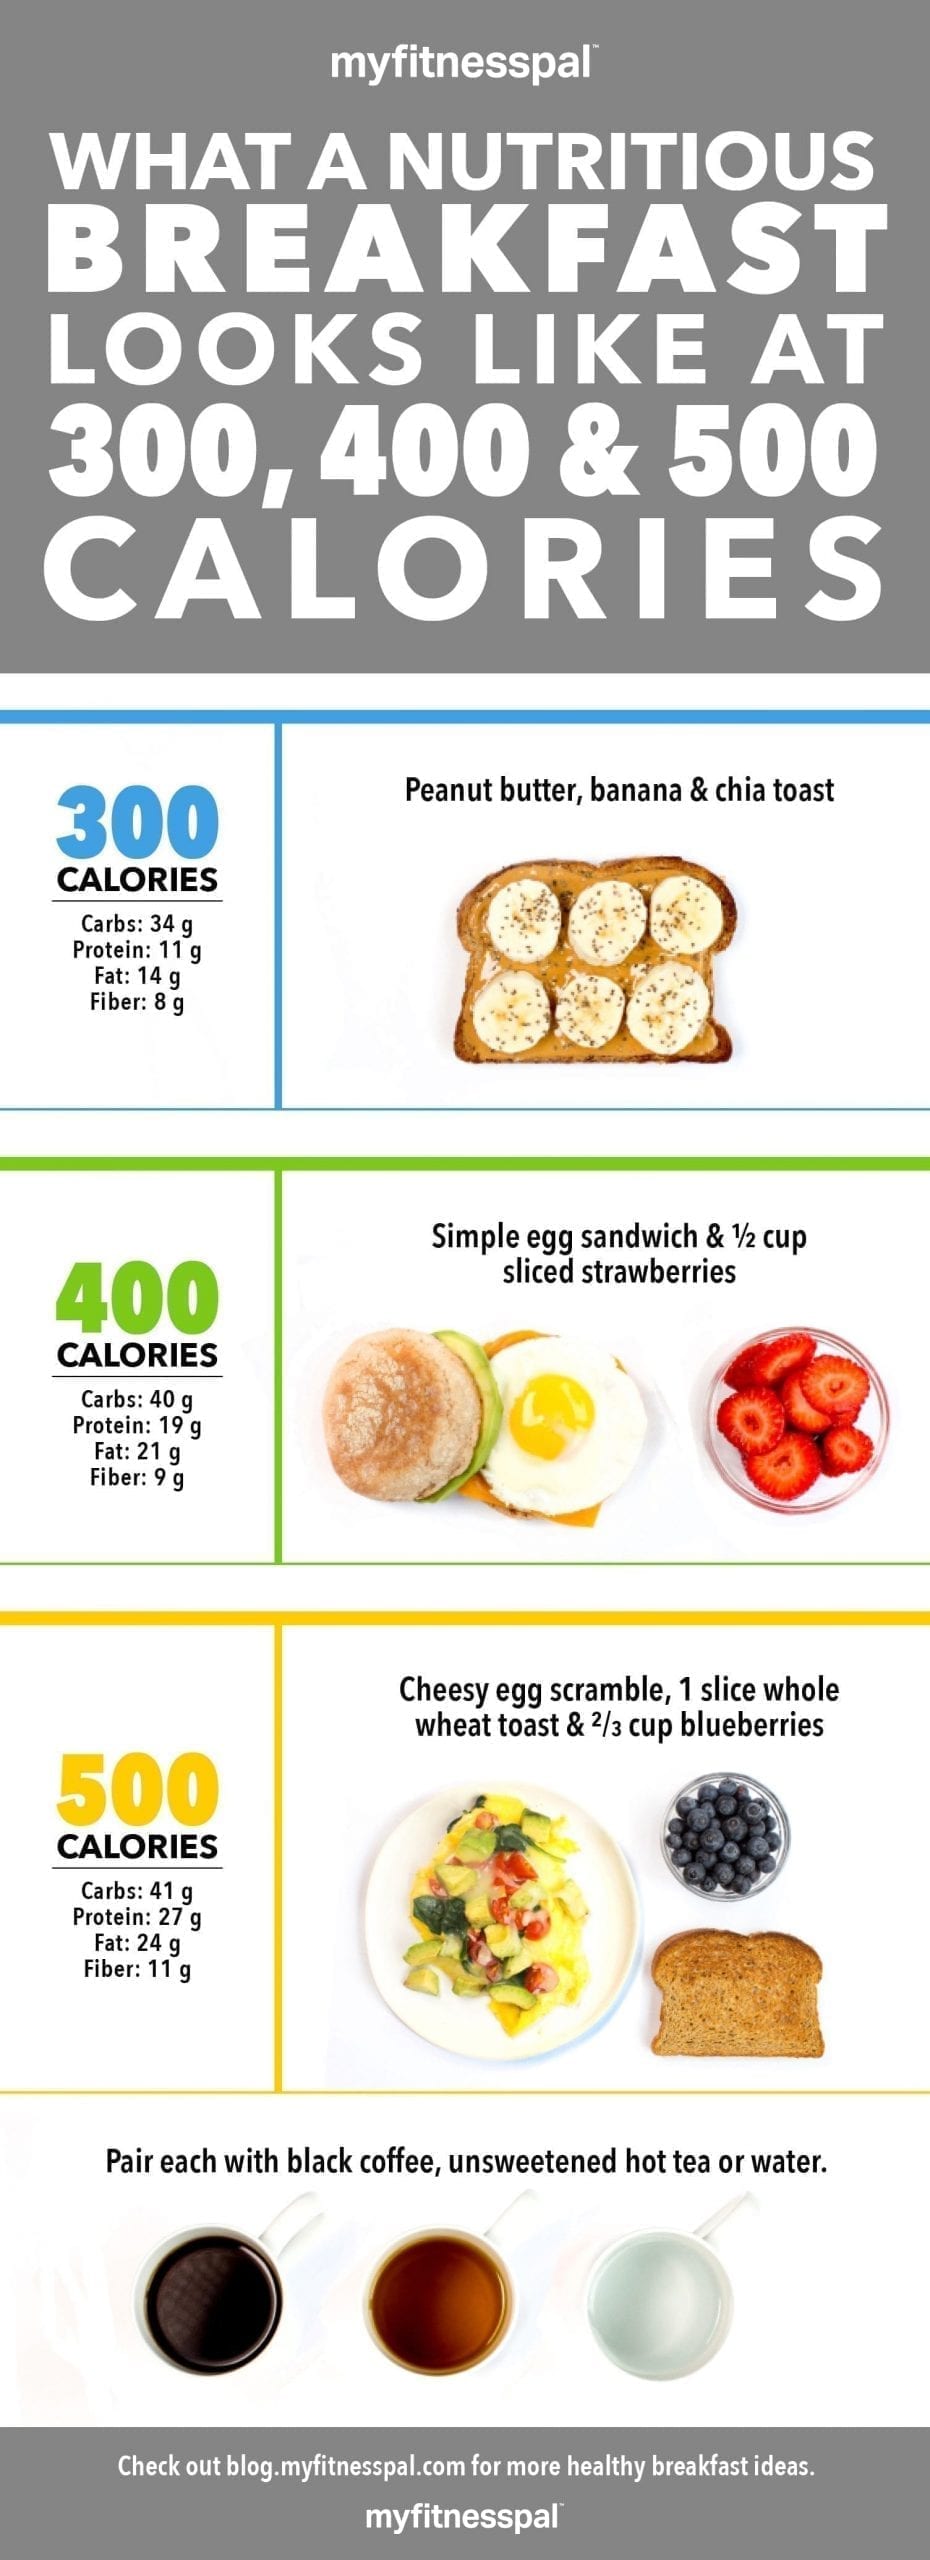 What Fast Food Can I Eat Under 500 Calories: Healthy Choices On The Menu